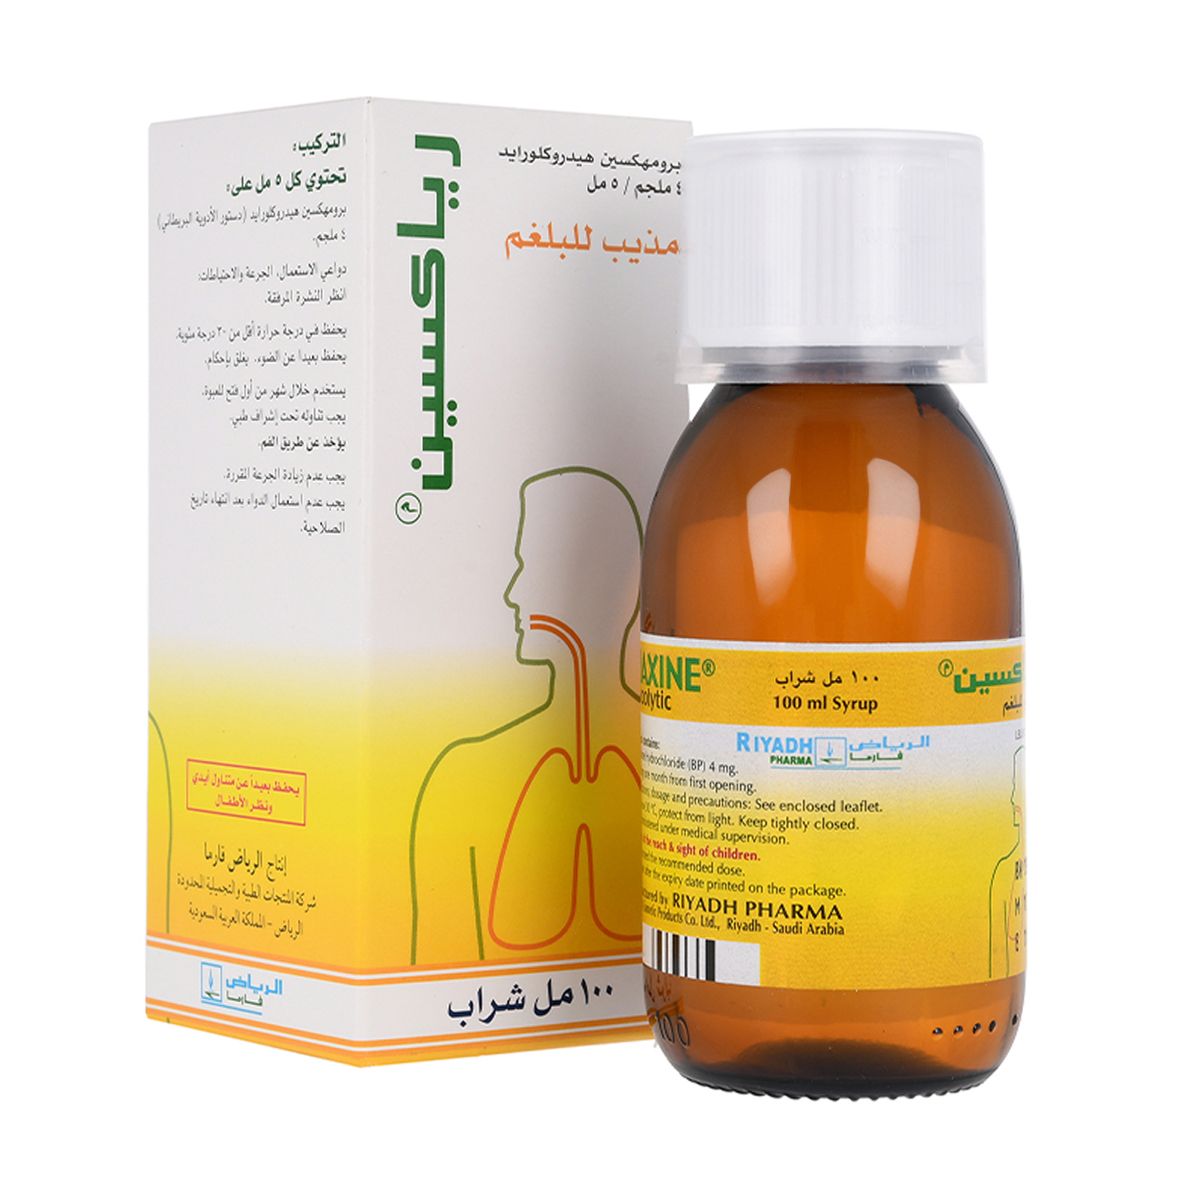 Riaxine, Syrup, Relieves Cough (mucolytic) - 100 Ml